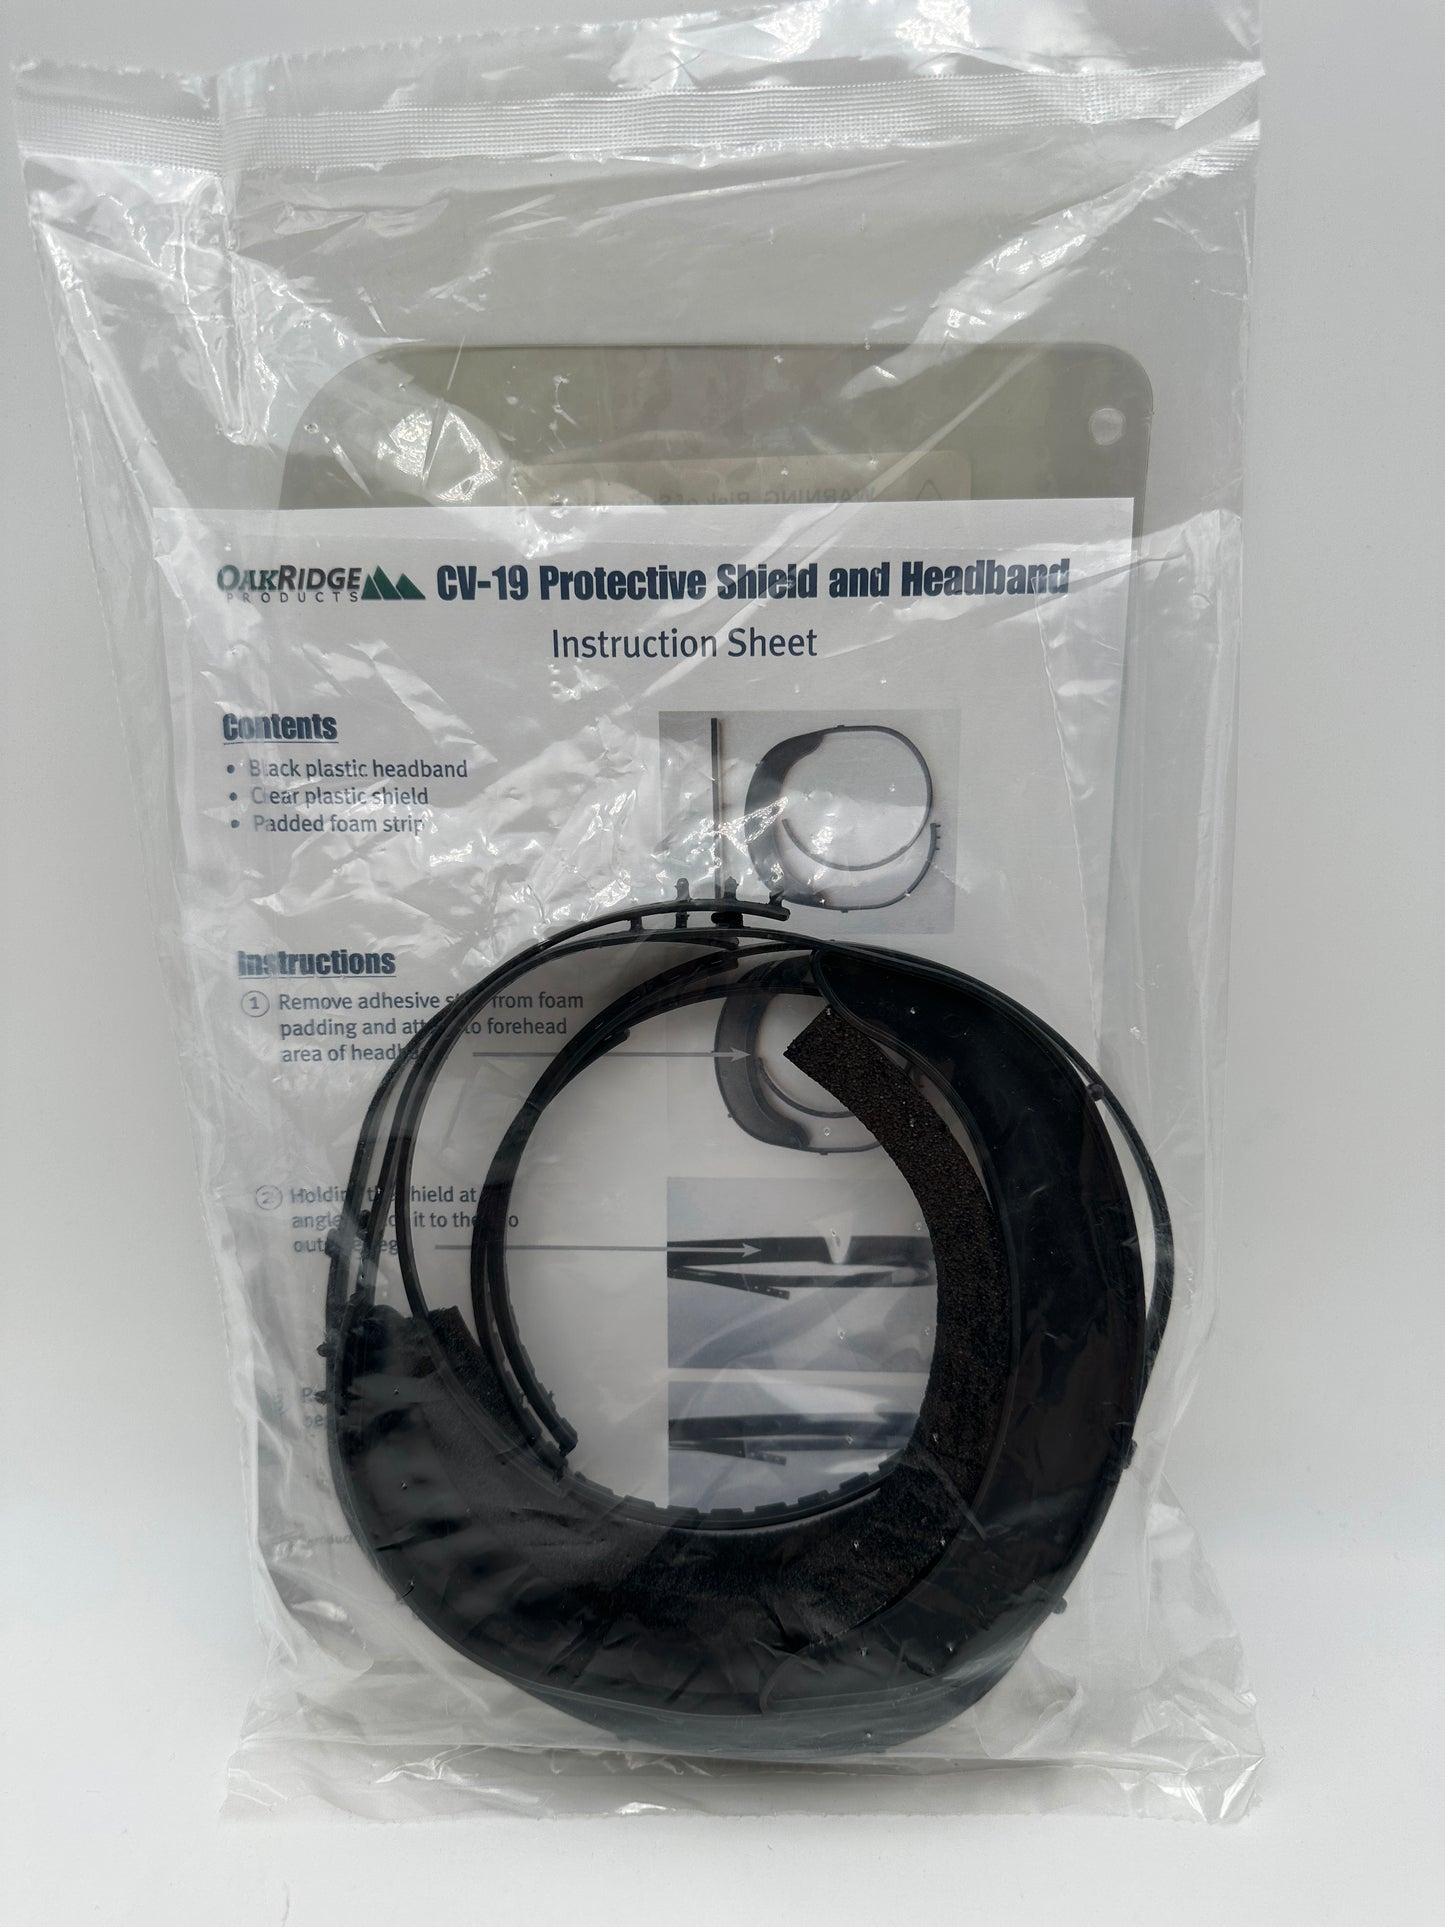 Oakridge Products CV-19 Protective Shield and Headband, 3 pack - new in package